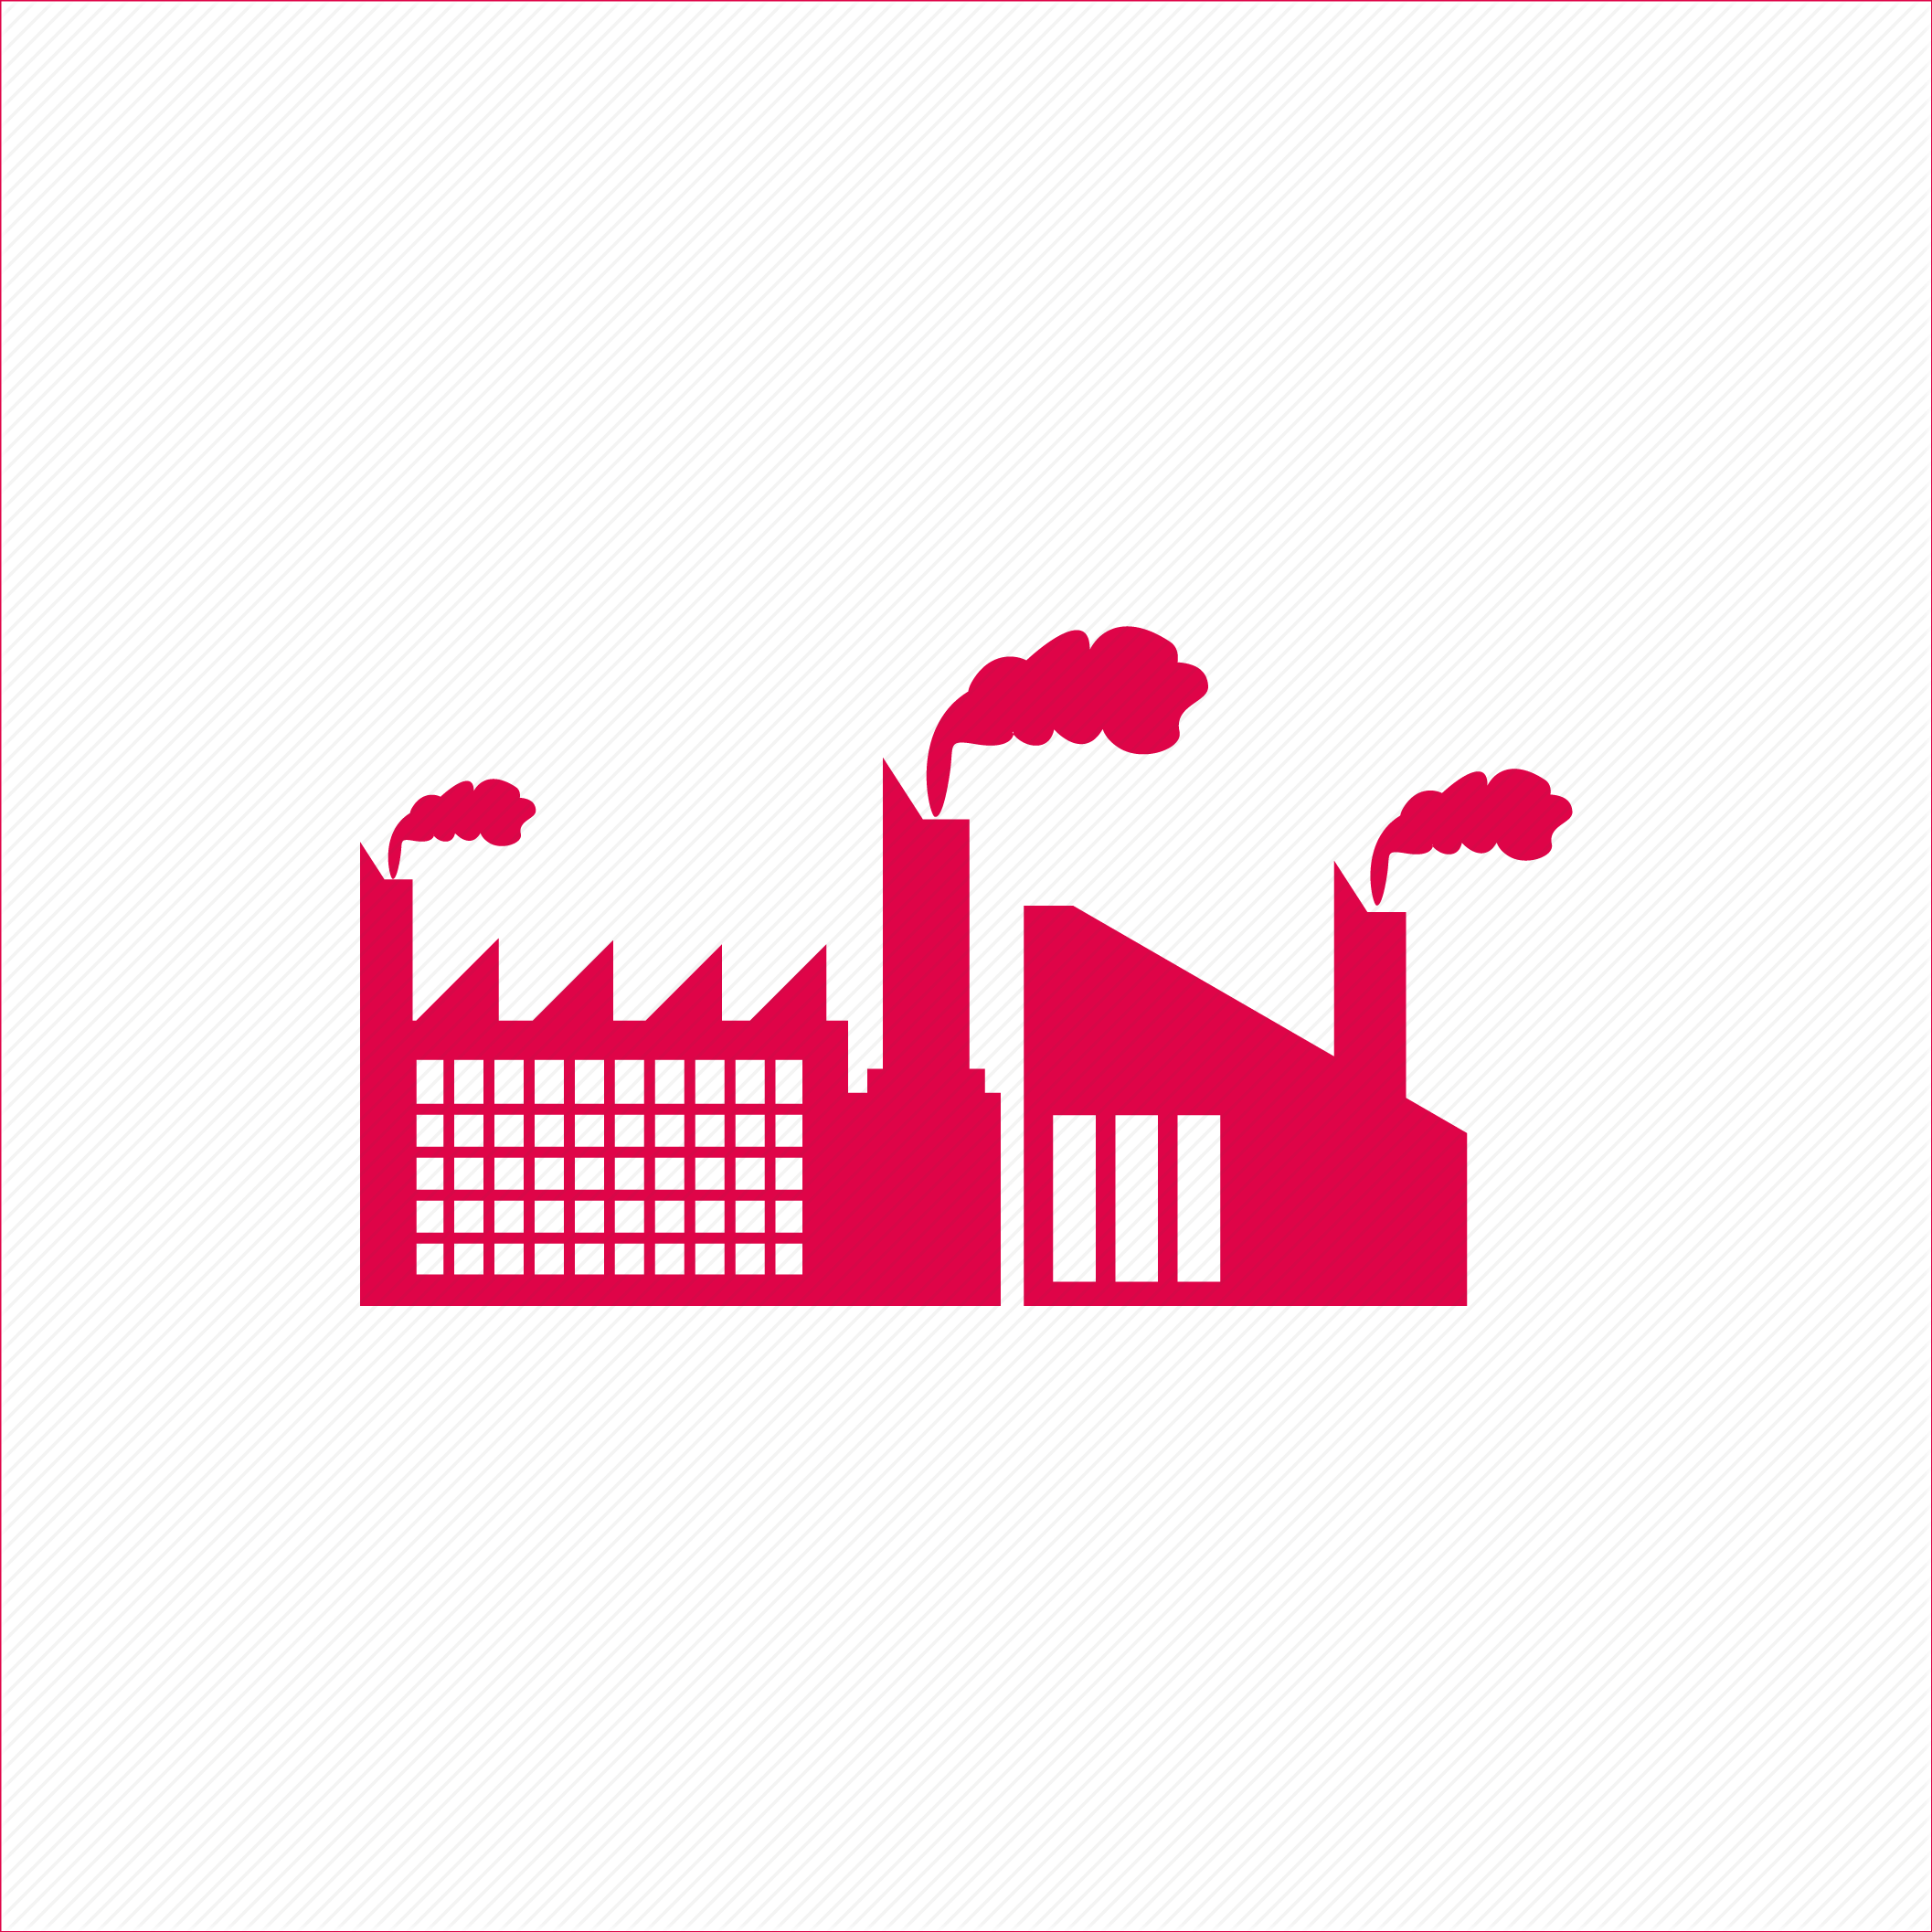 Factory And Industries Icon - Download Free Vector Art, Stock 